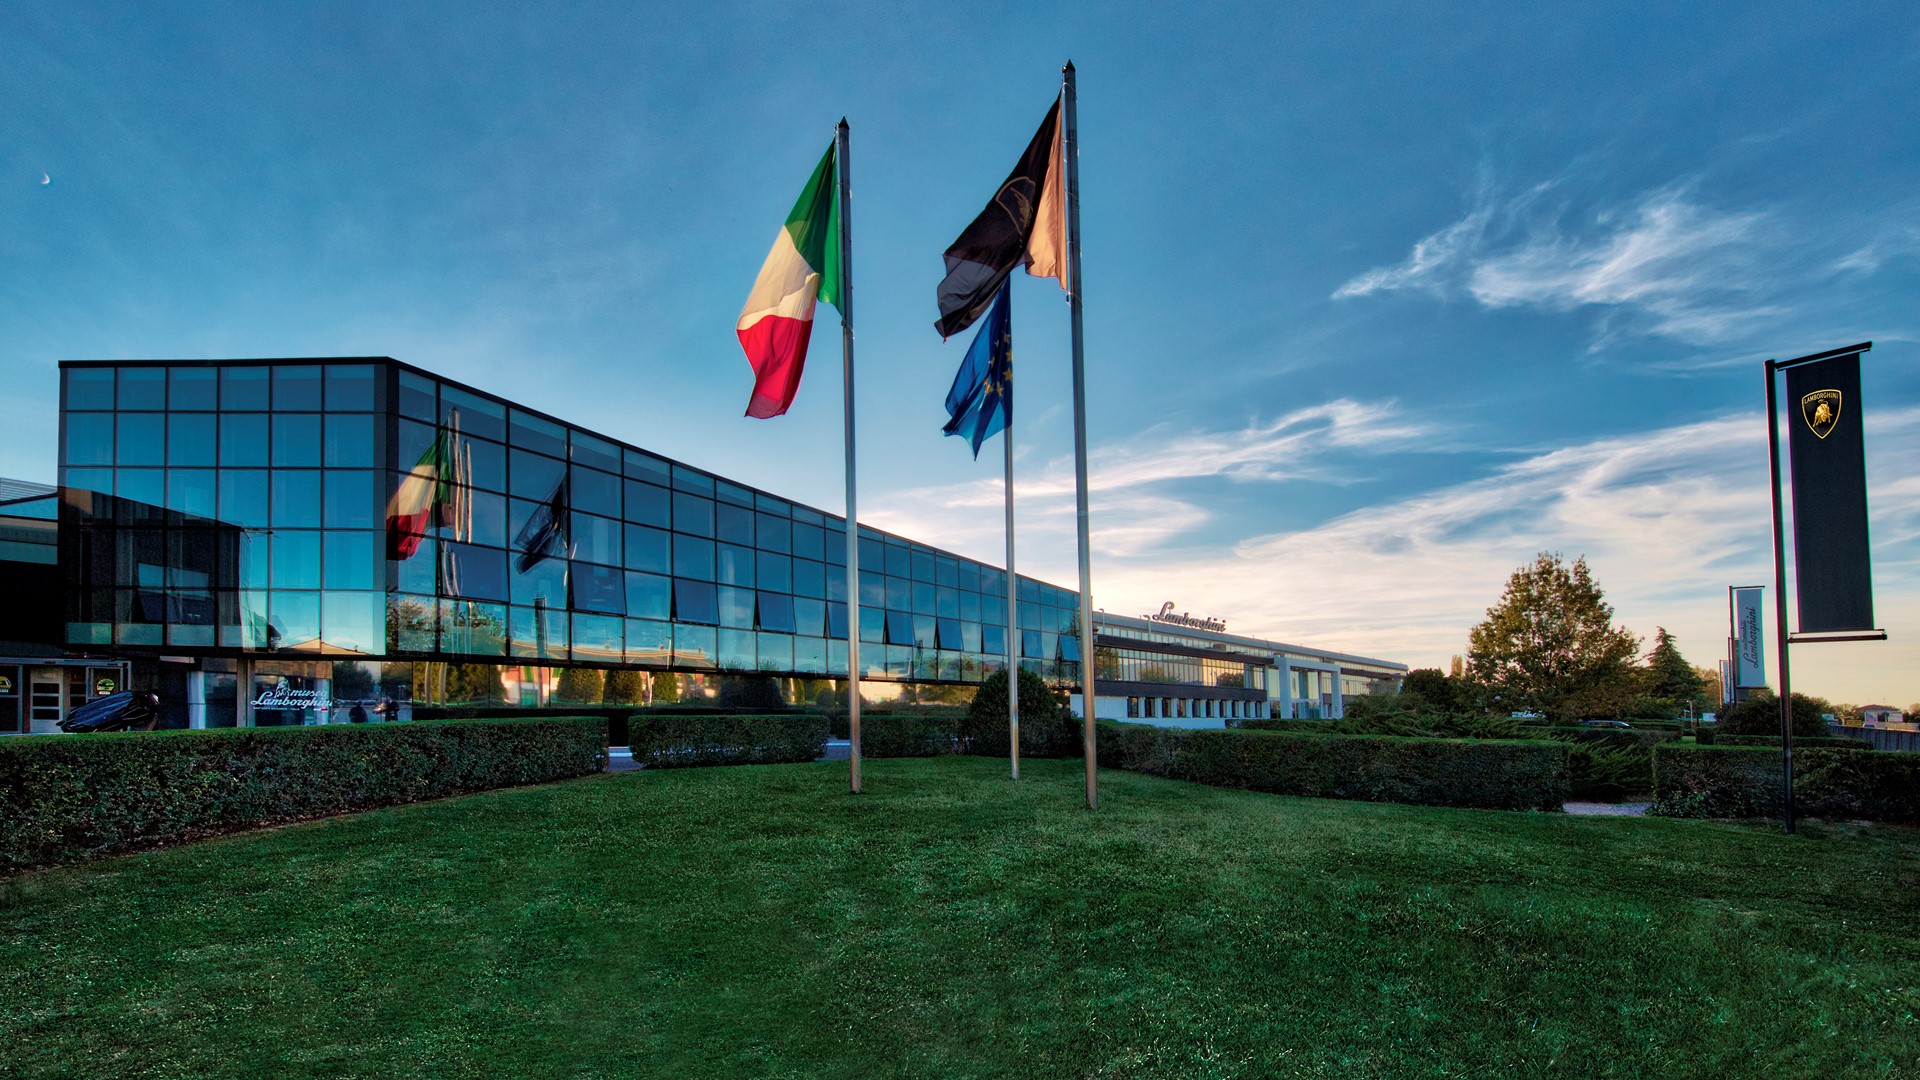 The new Lamborghini factory in Sant'Agata Bolognese: production site  doubled, incorporating cutting−edge technologies